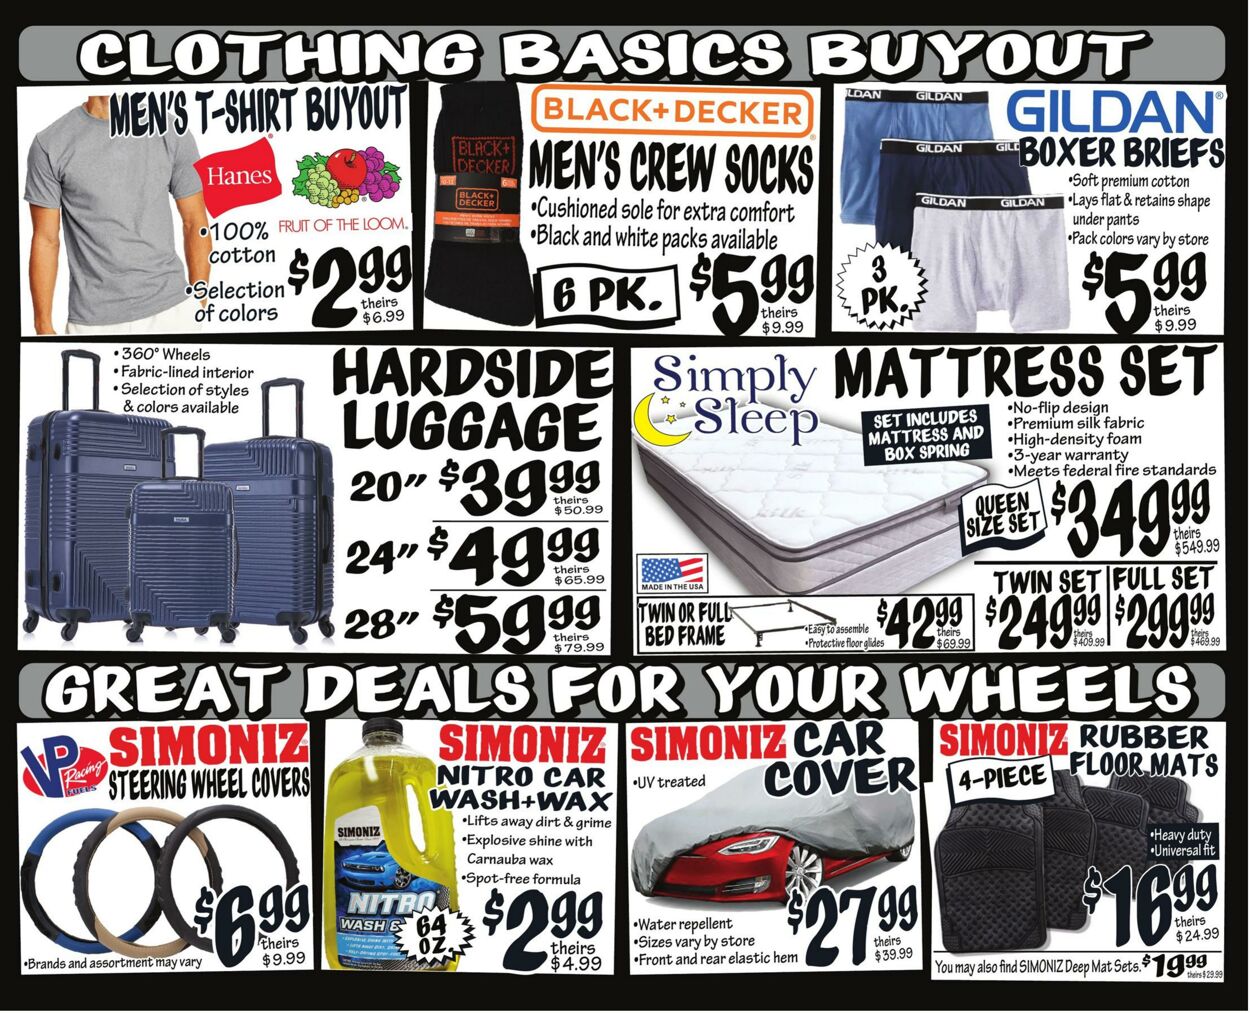 Weekly ad Ollie's 08/31/2022 - 09/06/2022